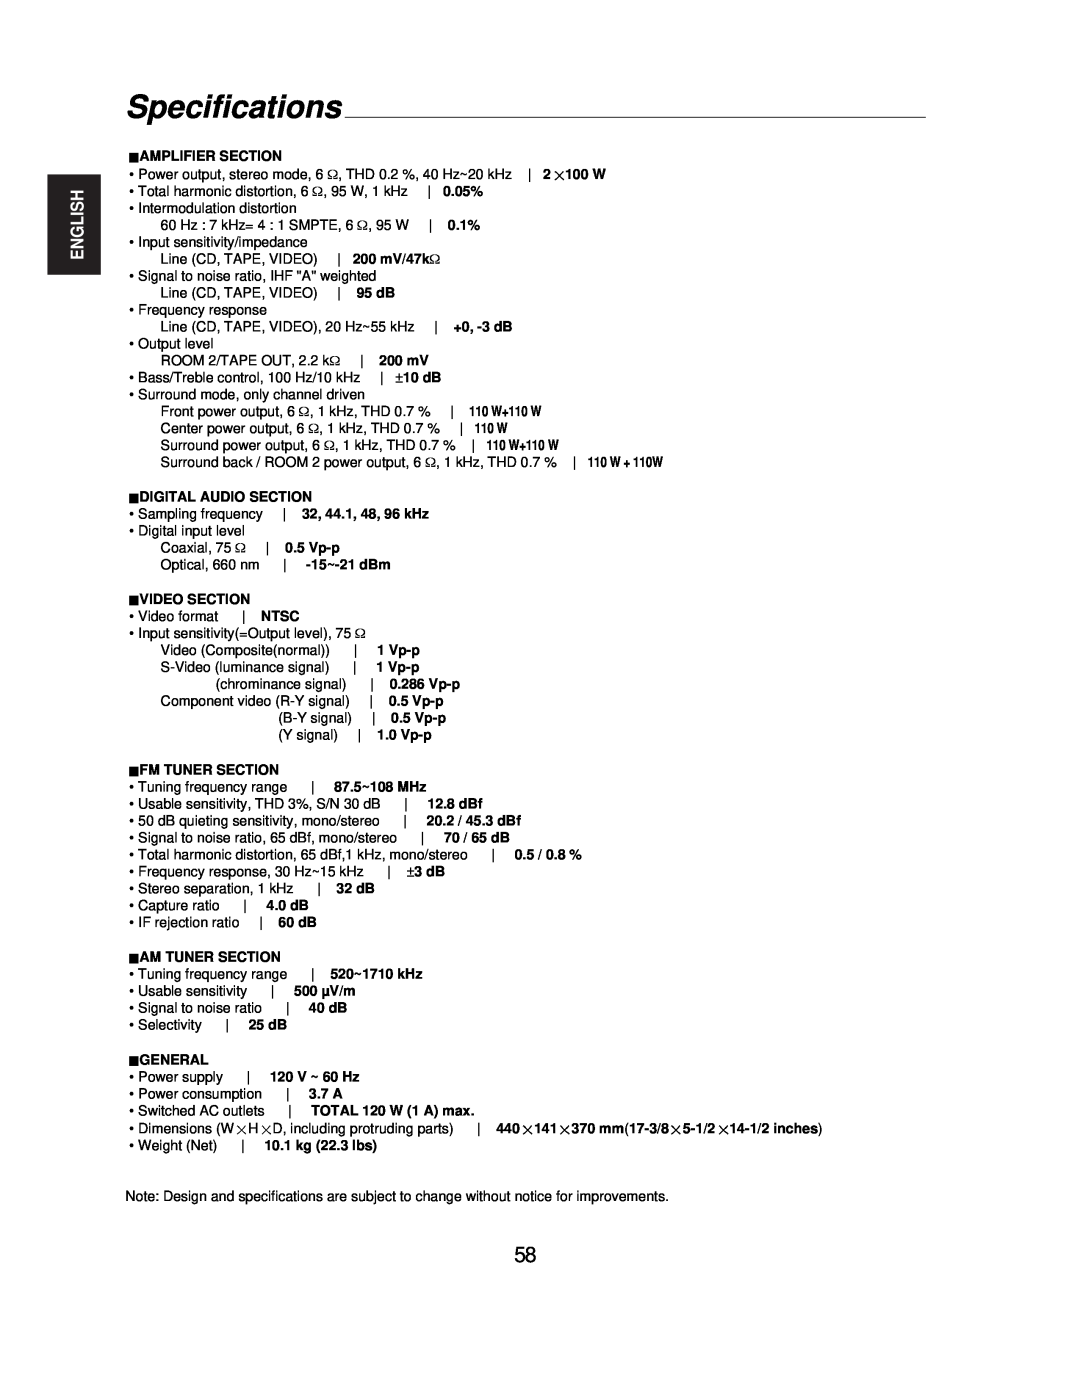 Sherwood R-771 manual Specifications, English 